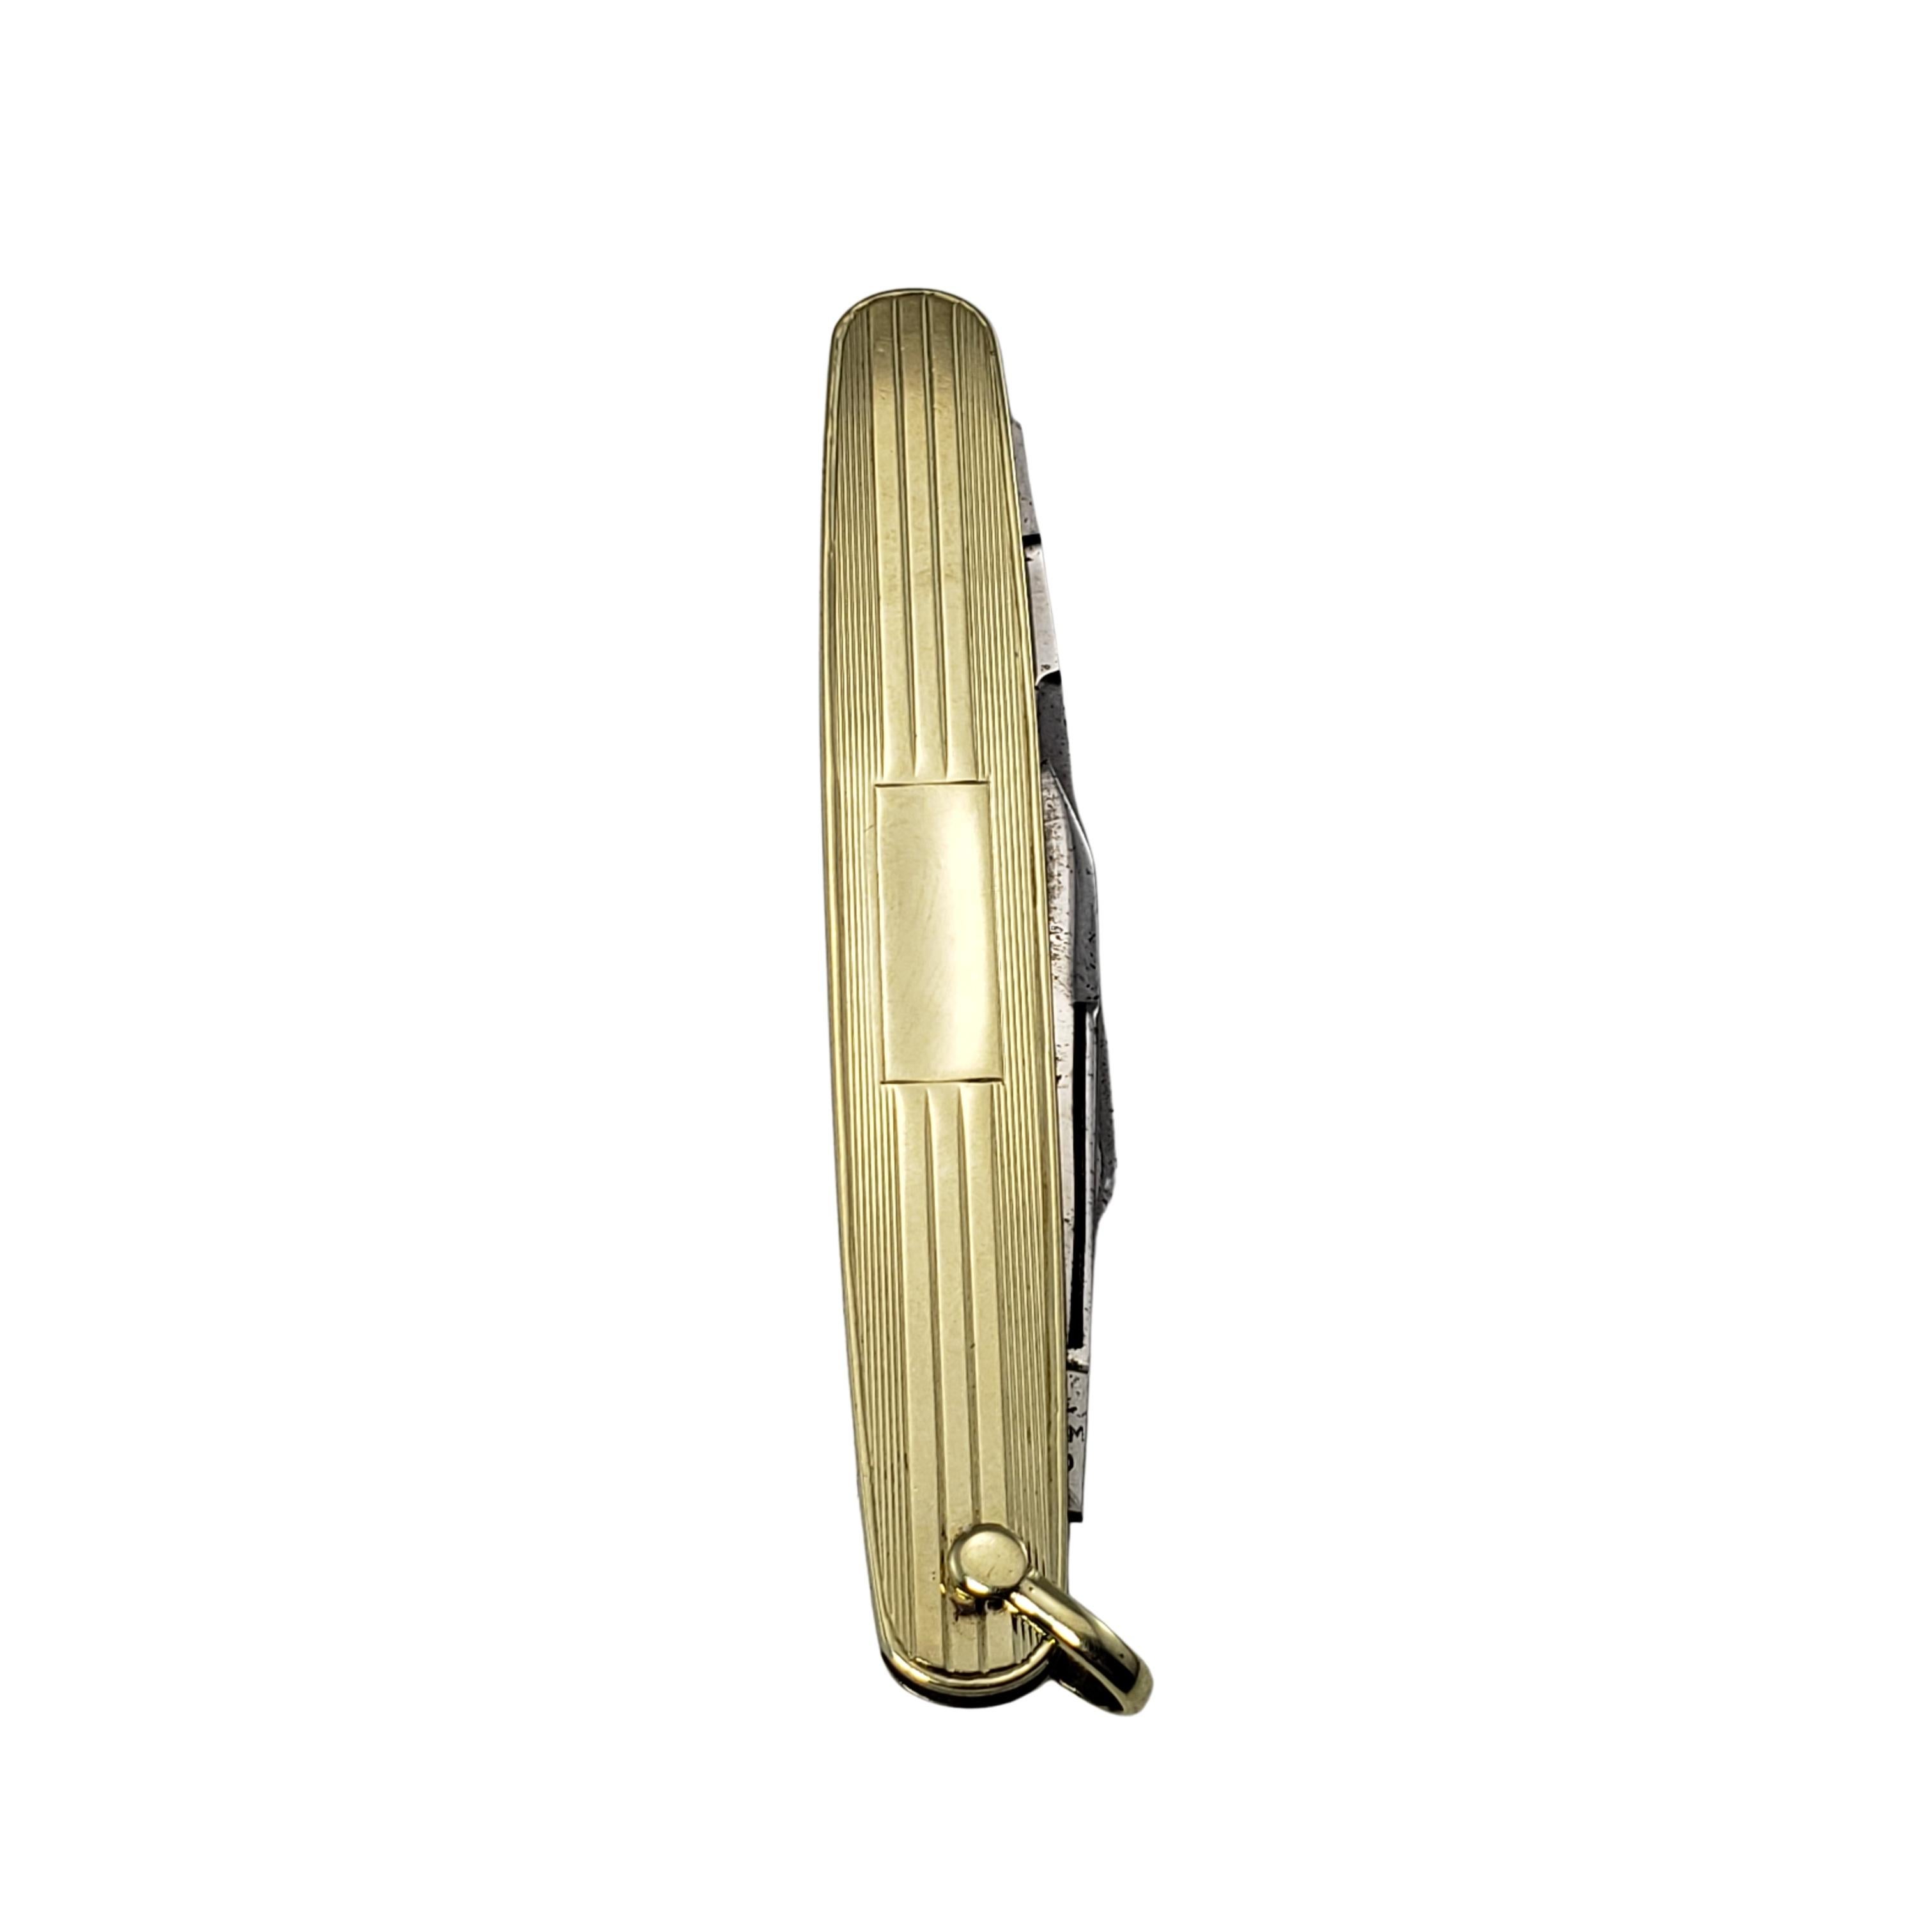 14 Karat Yellow Gold and Stainless Steel Pocket Knife-

This elegant pocket knife features two stainless steel blades house in beautifully detailed 14K yellow gold.  Polished bar on case for monogram.

Size: 66 mm x 11 mm

Weight:  10.8 dwt. /  16.9